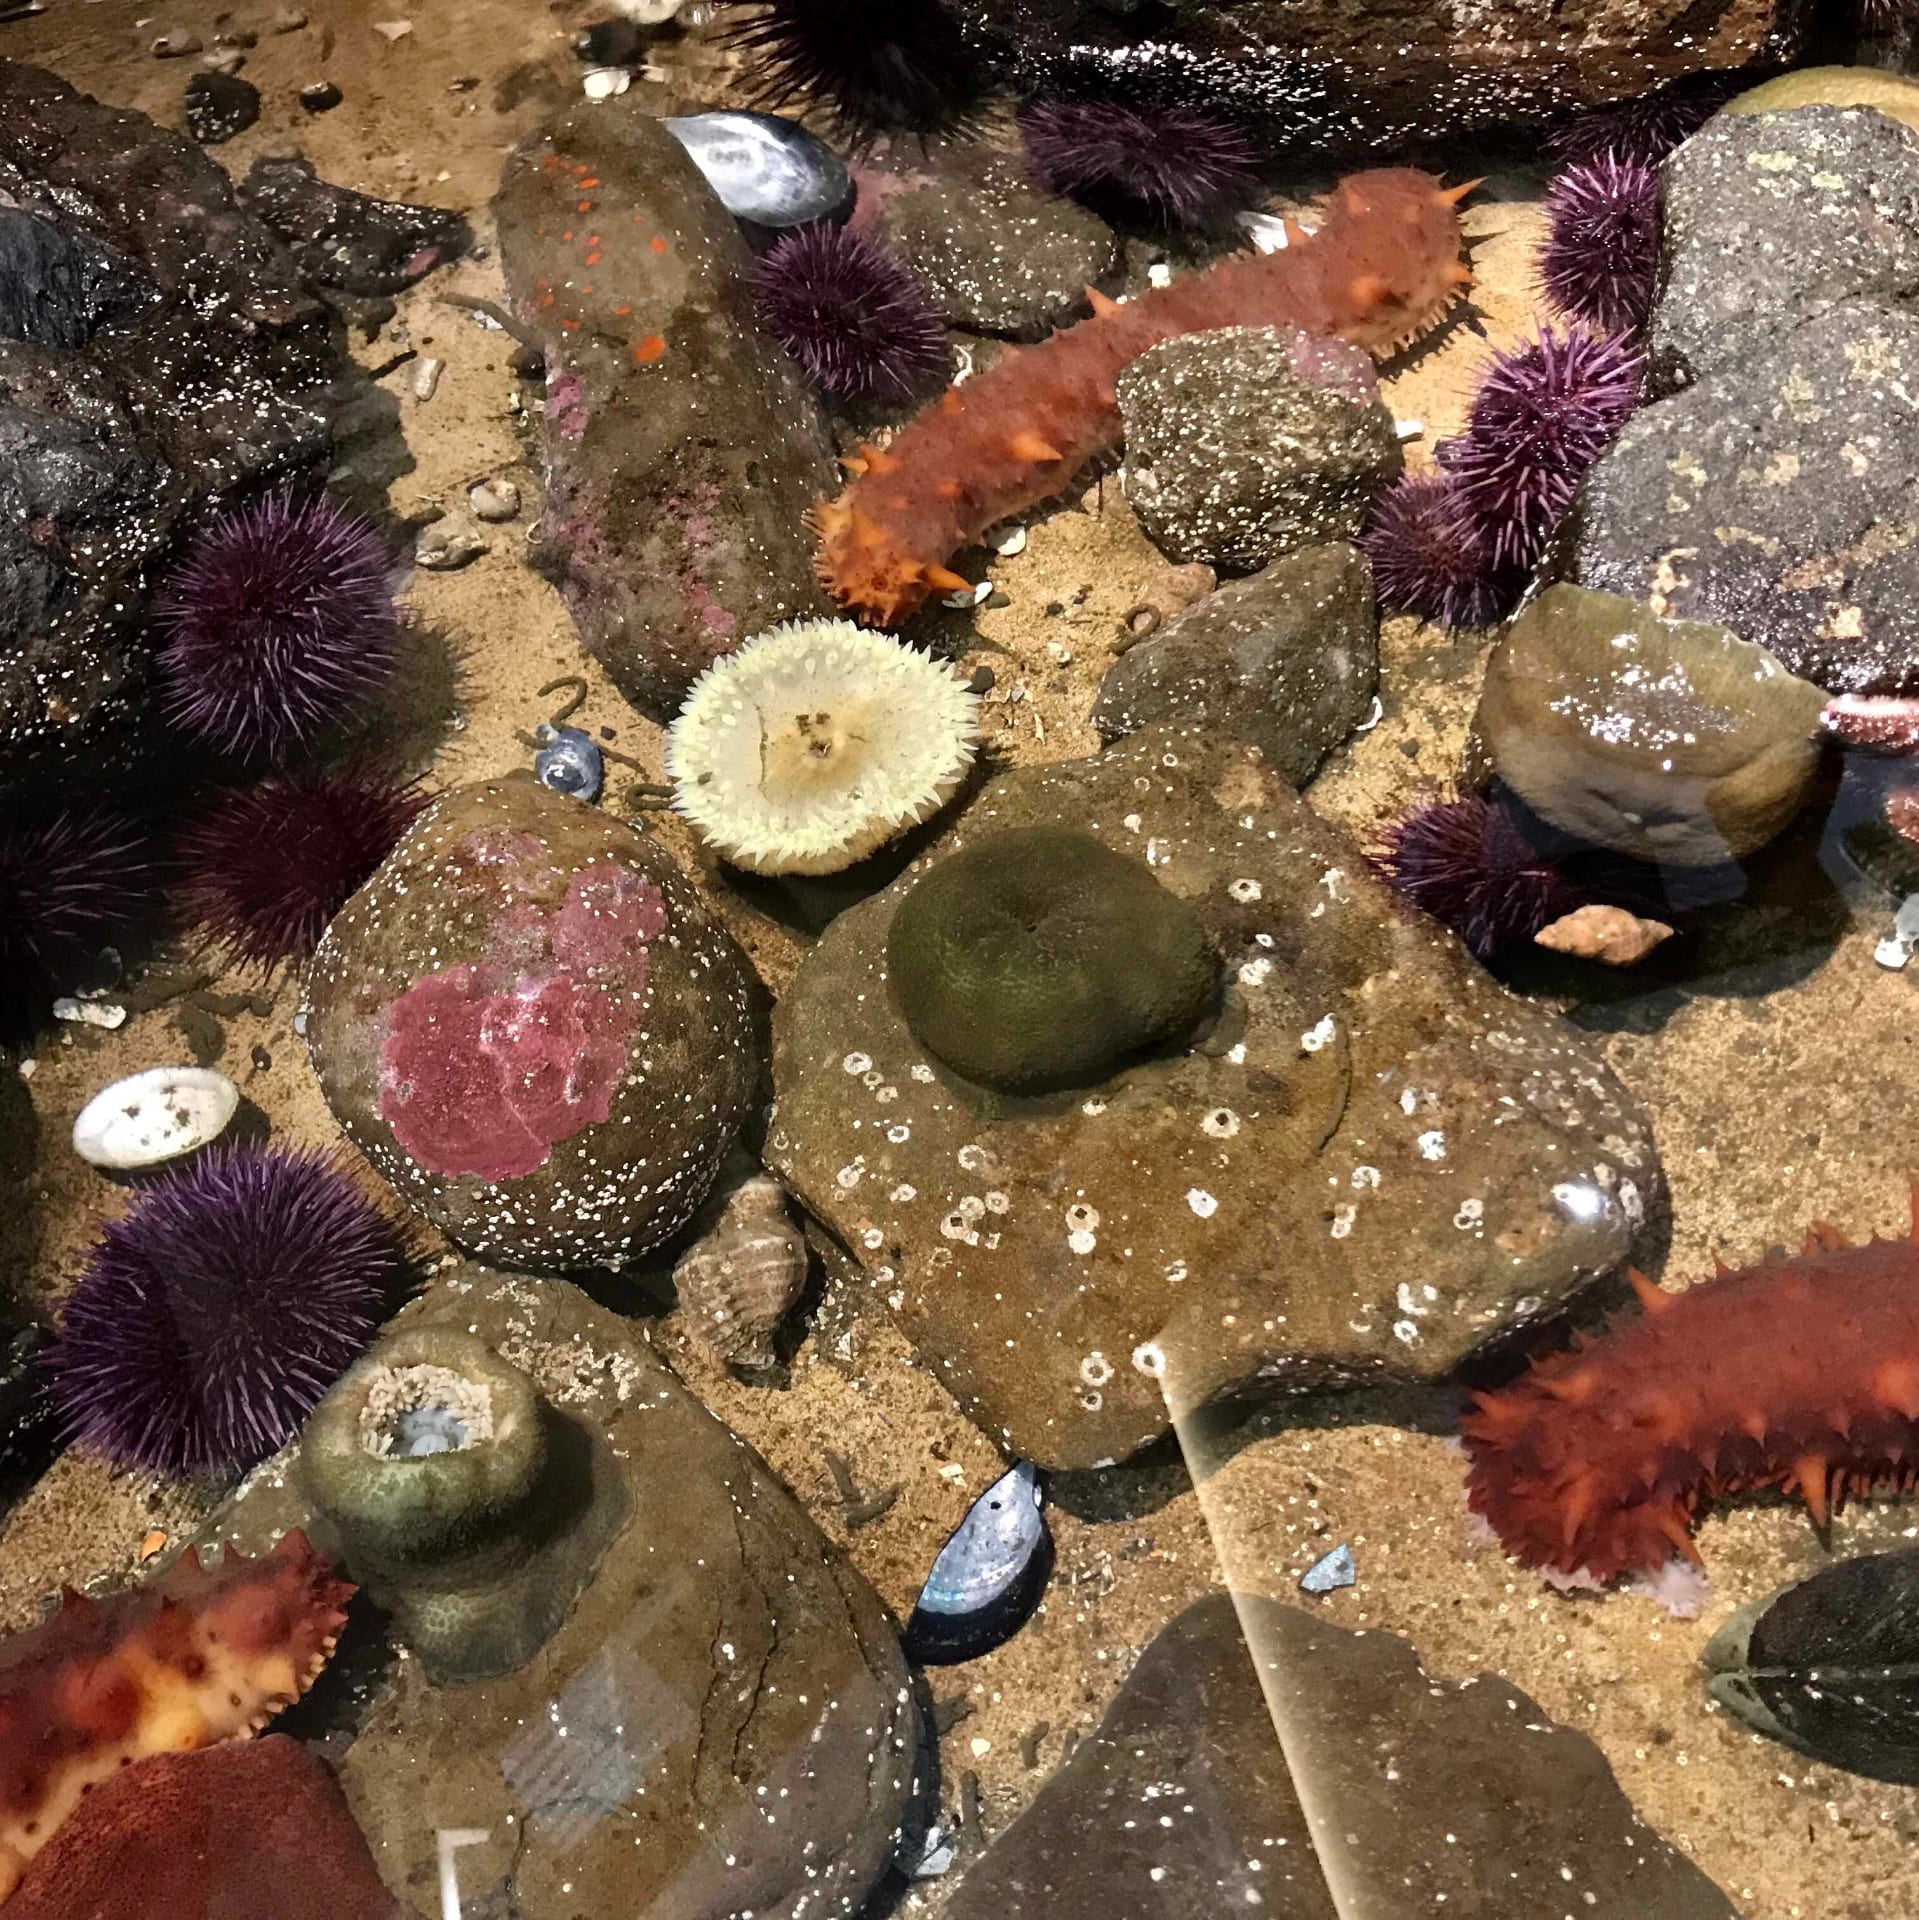 On-site: Living in Tidepools - Adaptations